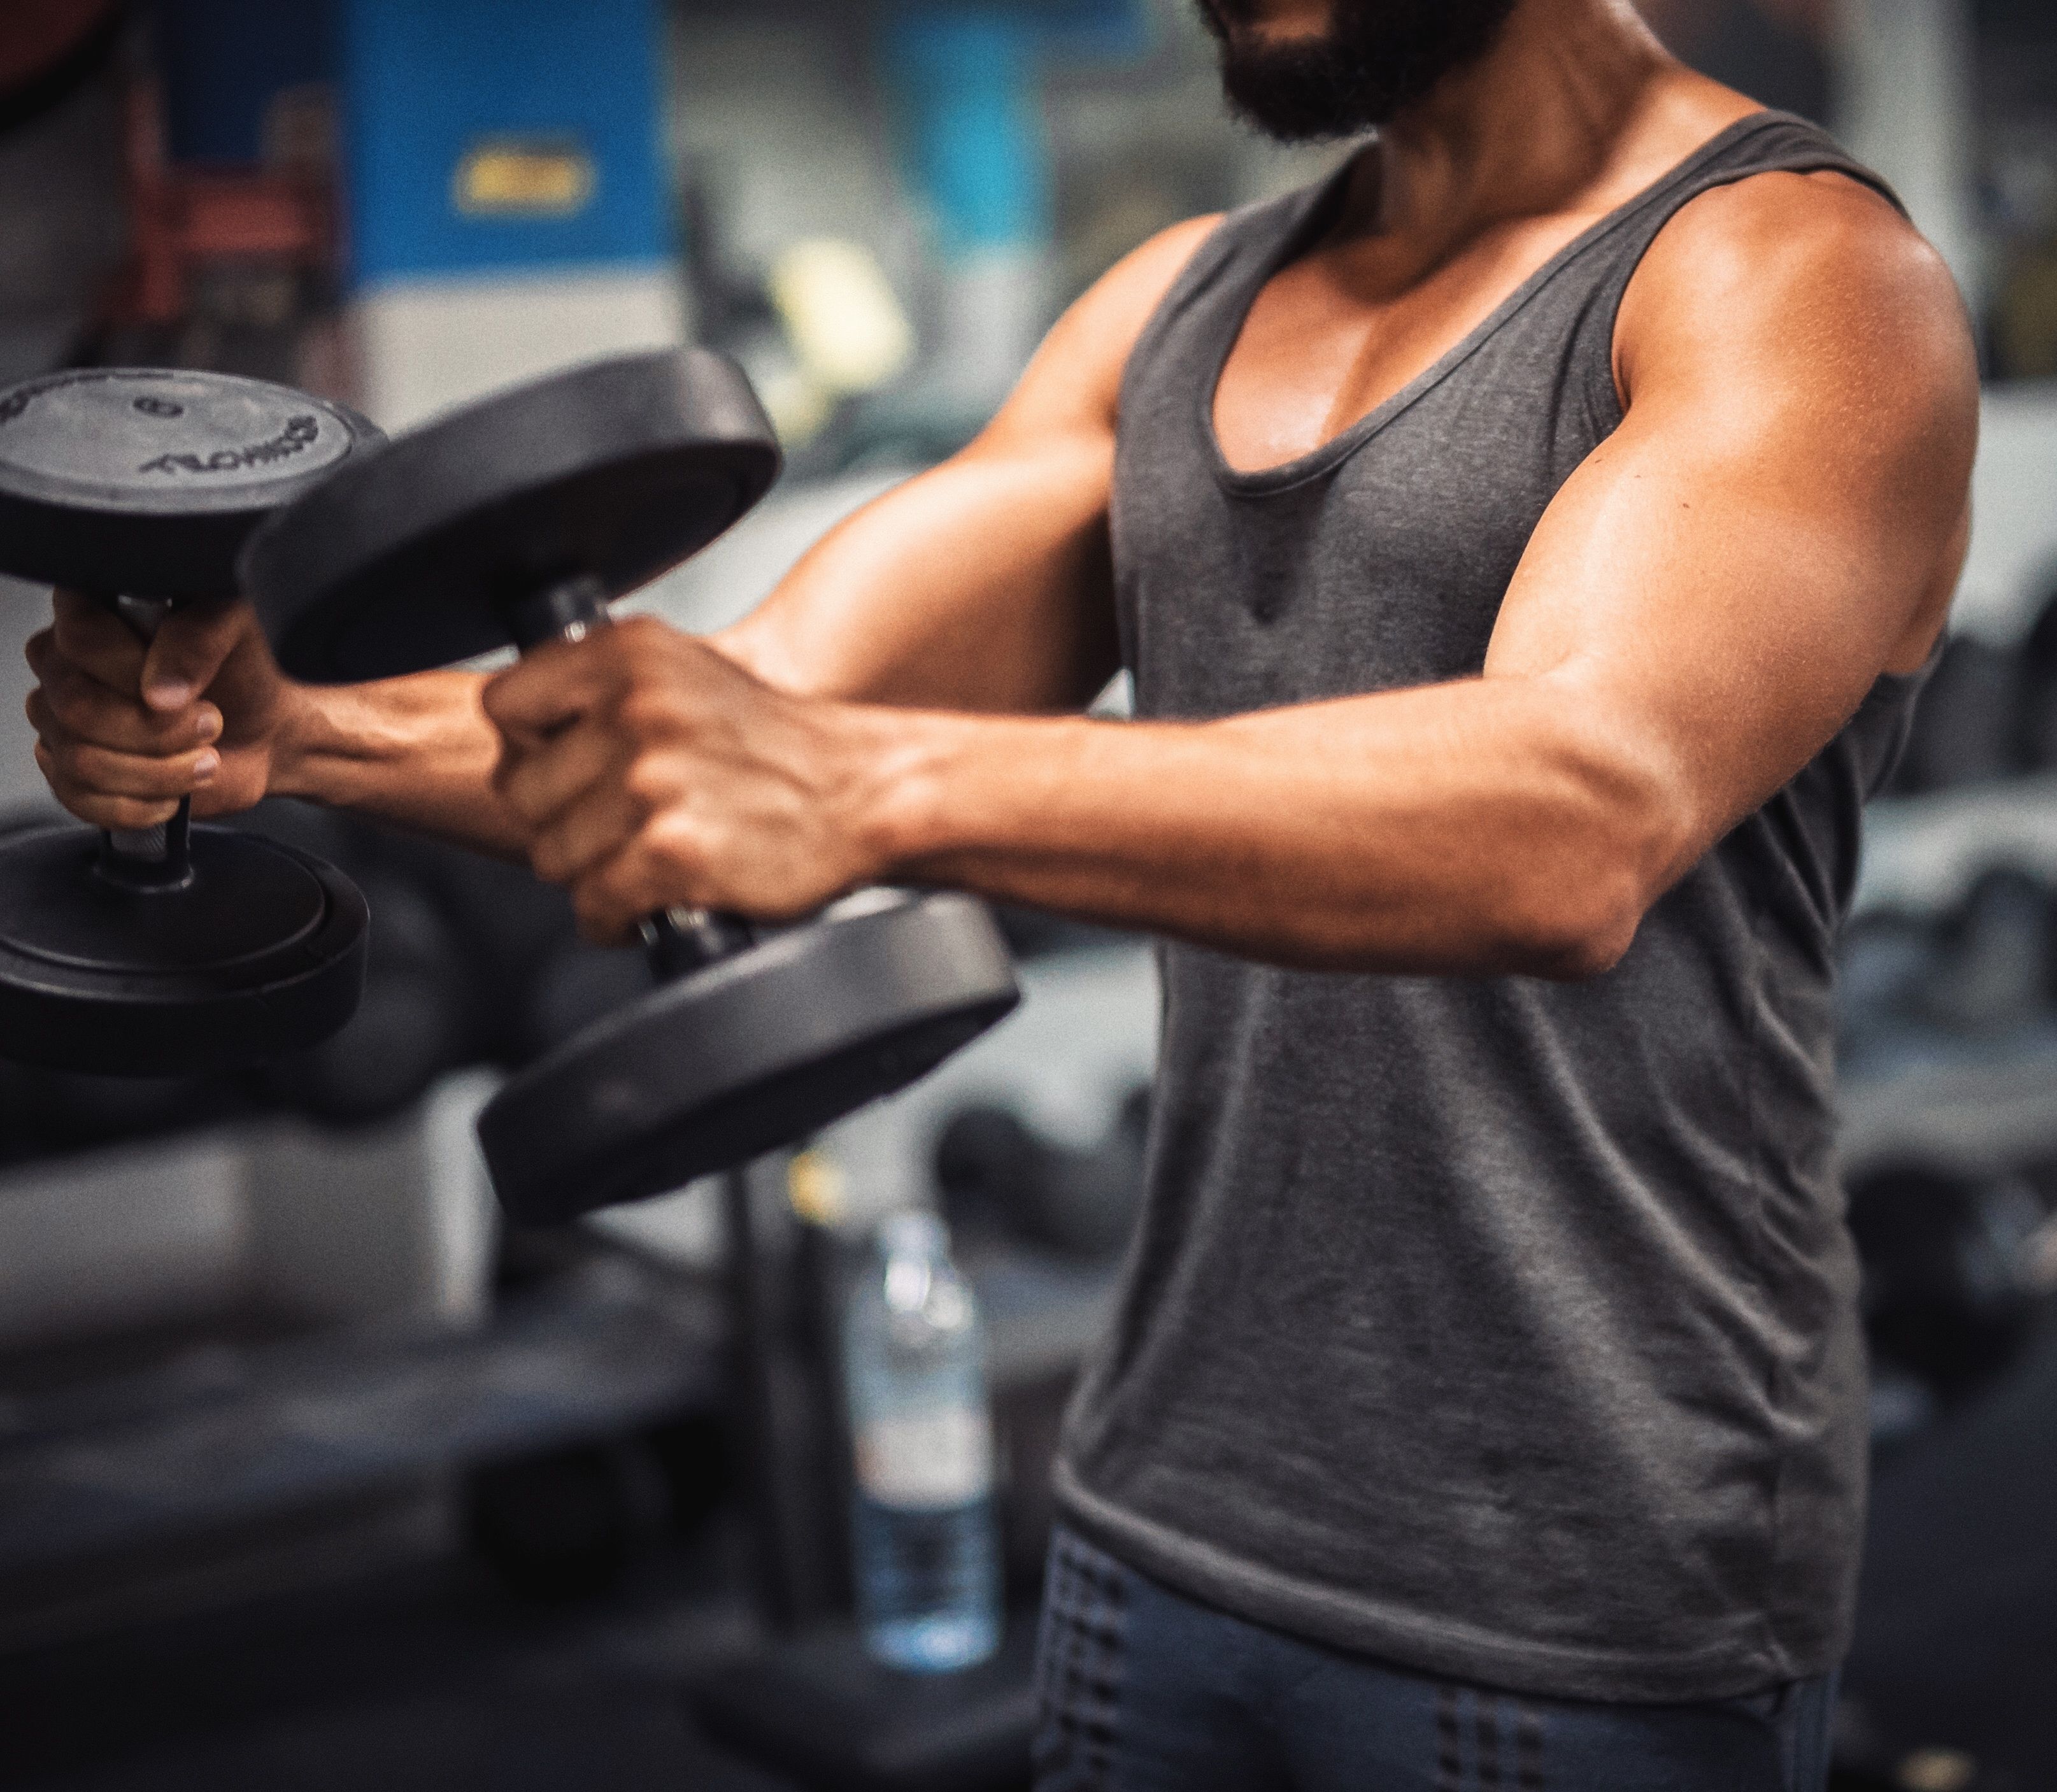 A beginner's guide on how to gain muscle